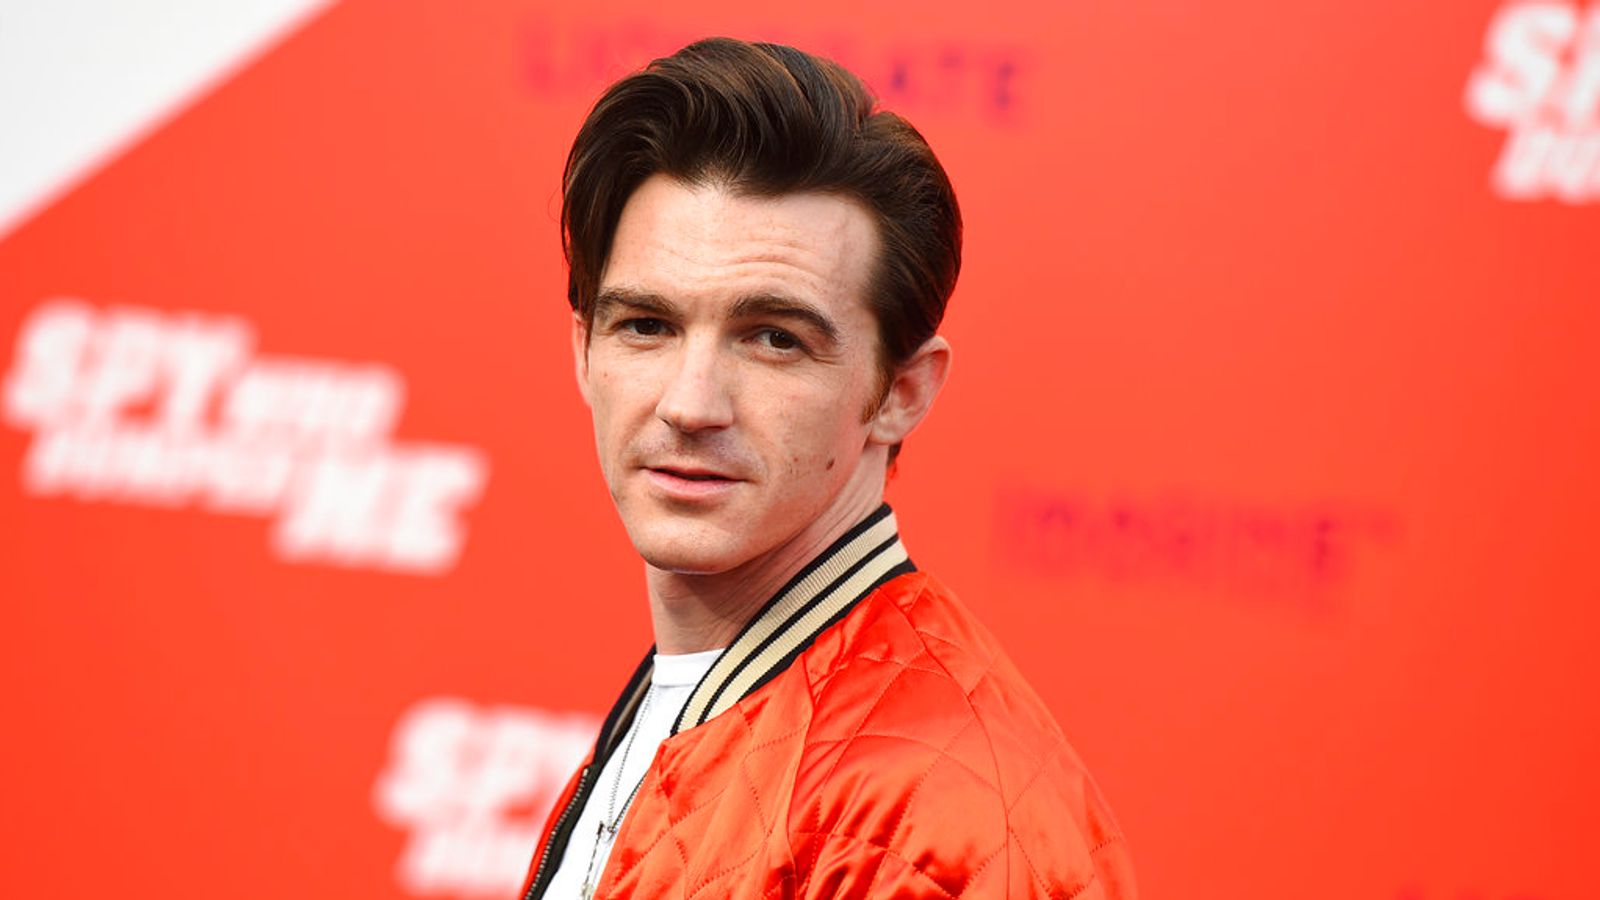 Drake Bell: Nickelodeon star found safe after being reported missing by police in Florida